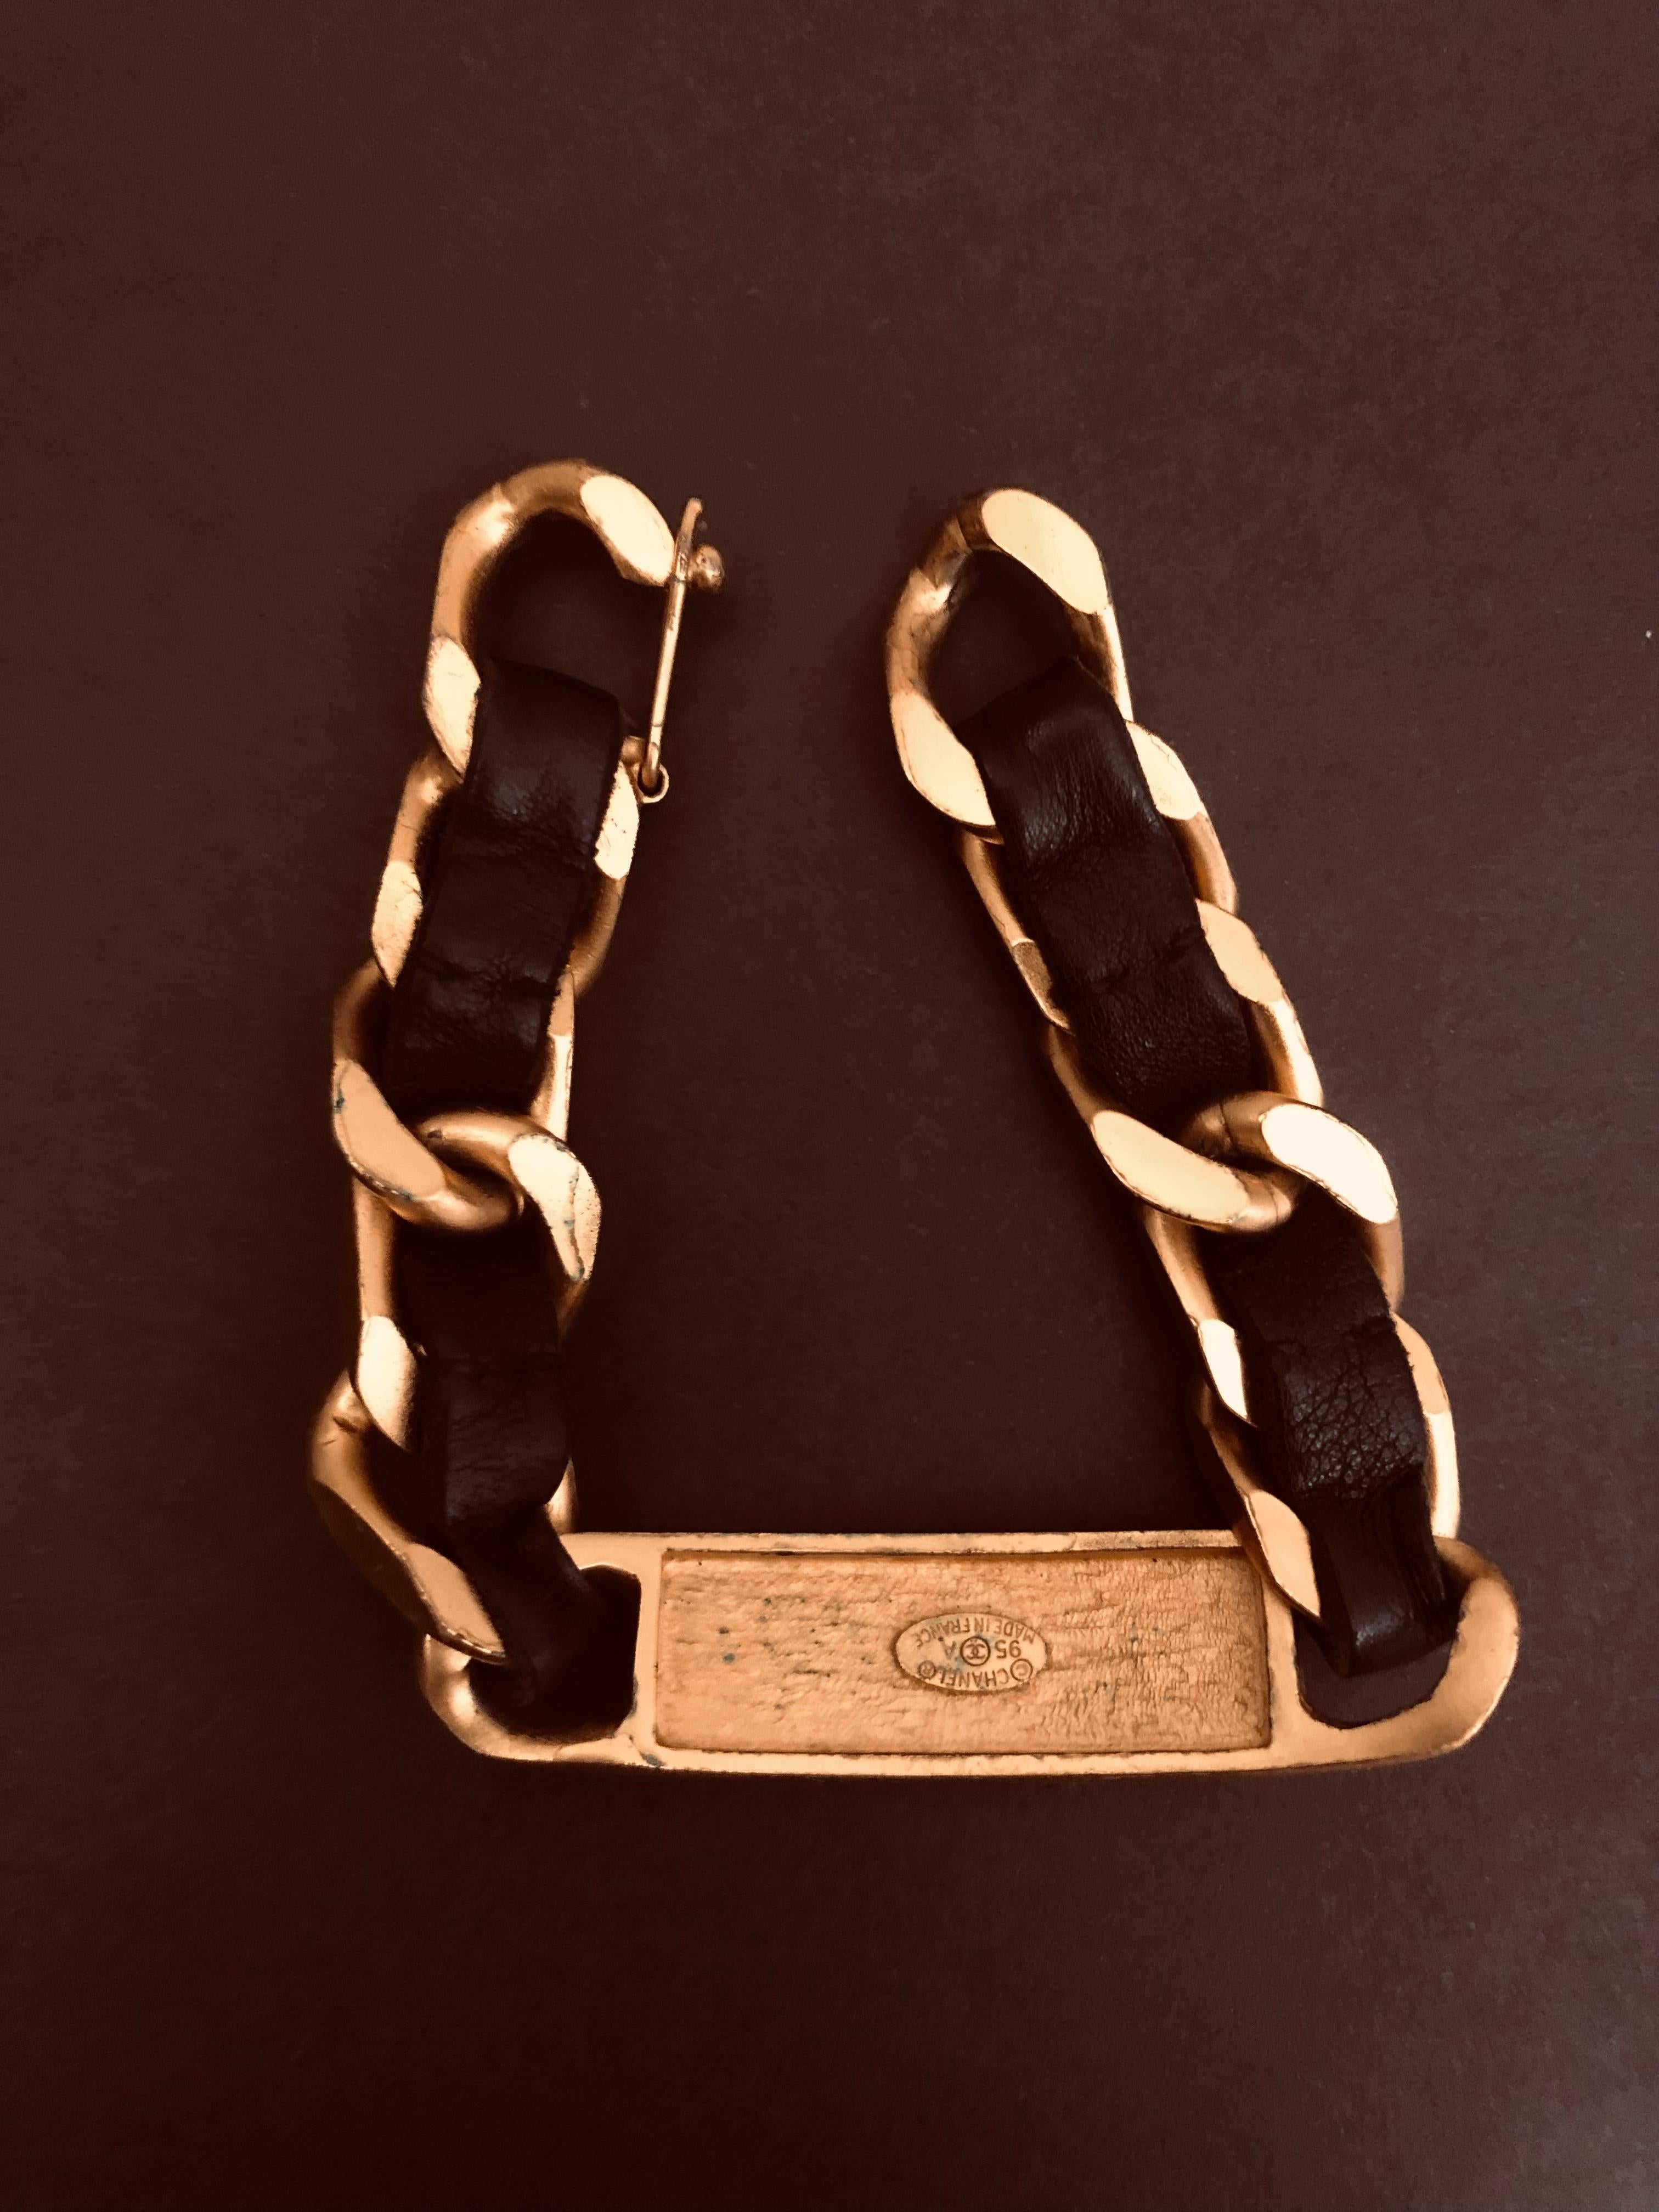 This vintage Chanel chain link bracelet is crafted of good toned metal interlaced with black lambskin leather. Hook fastening. Stamped CHANEL 95A, made in France. Inner circumference measures approximately 19 cm. Comes with box.

Condition: Very